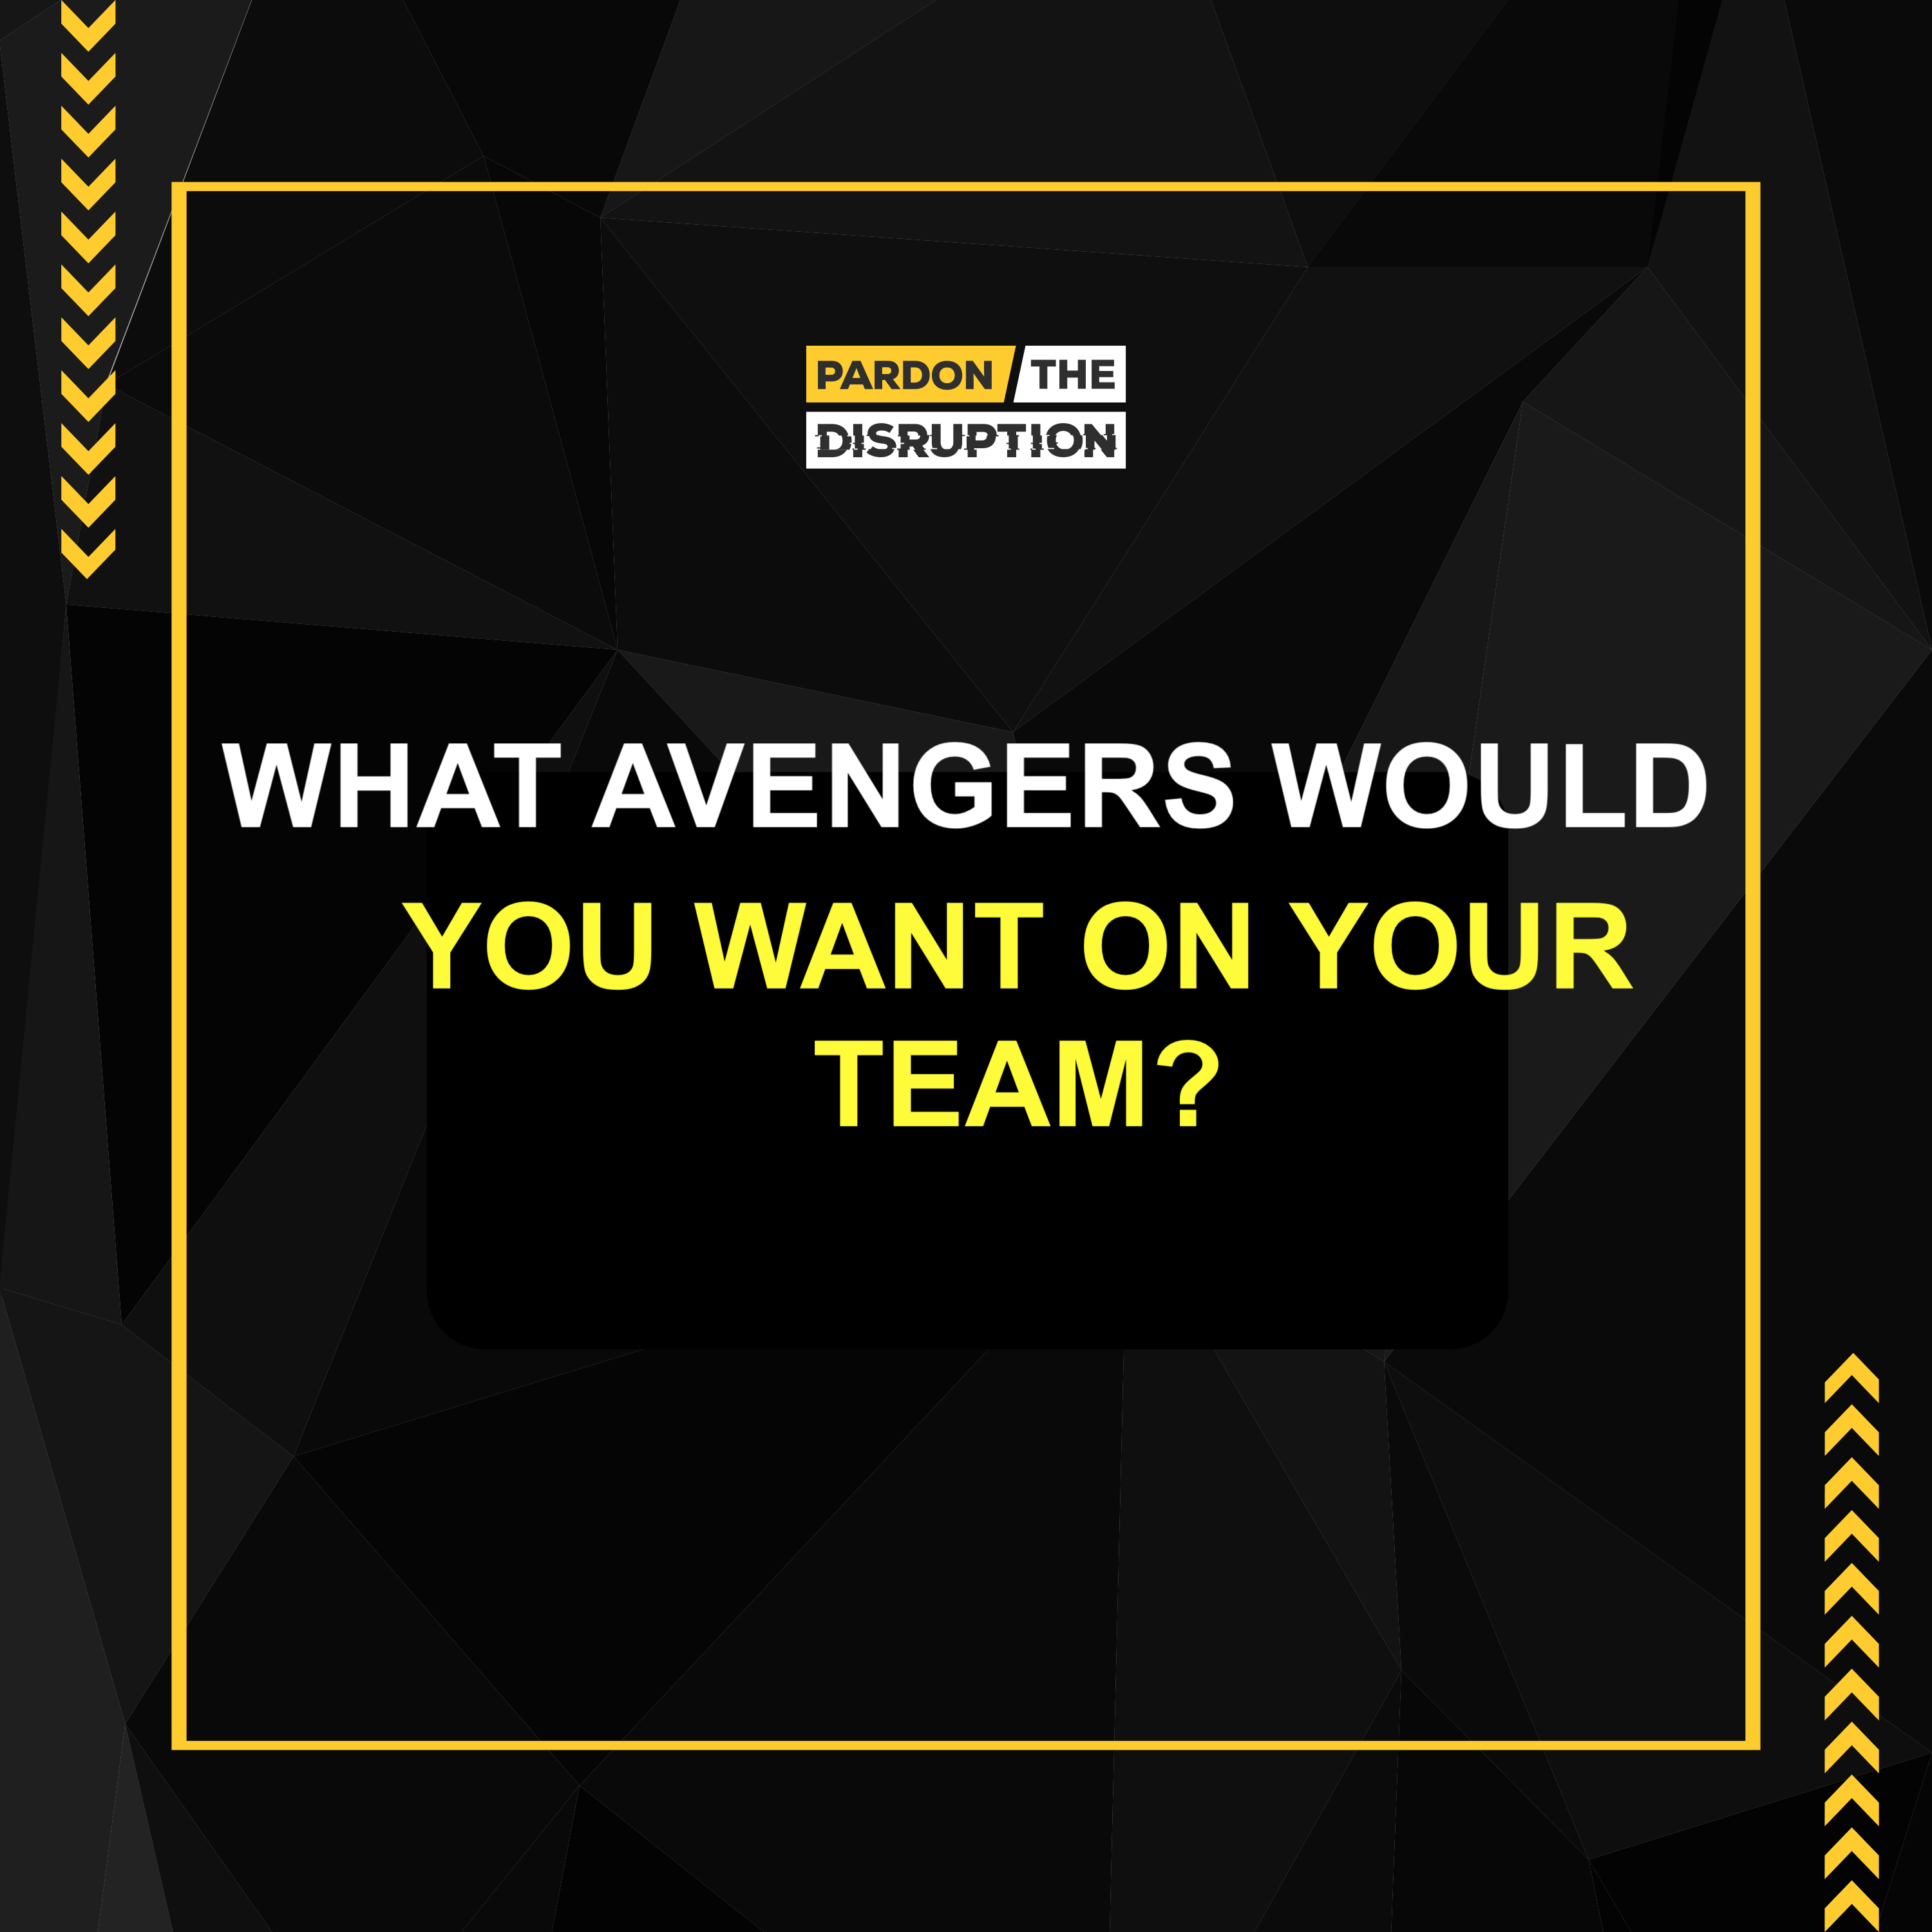 What Avengers Would You Want On Your Team? | Pardon The Disruption Debate Show